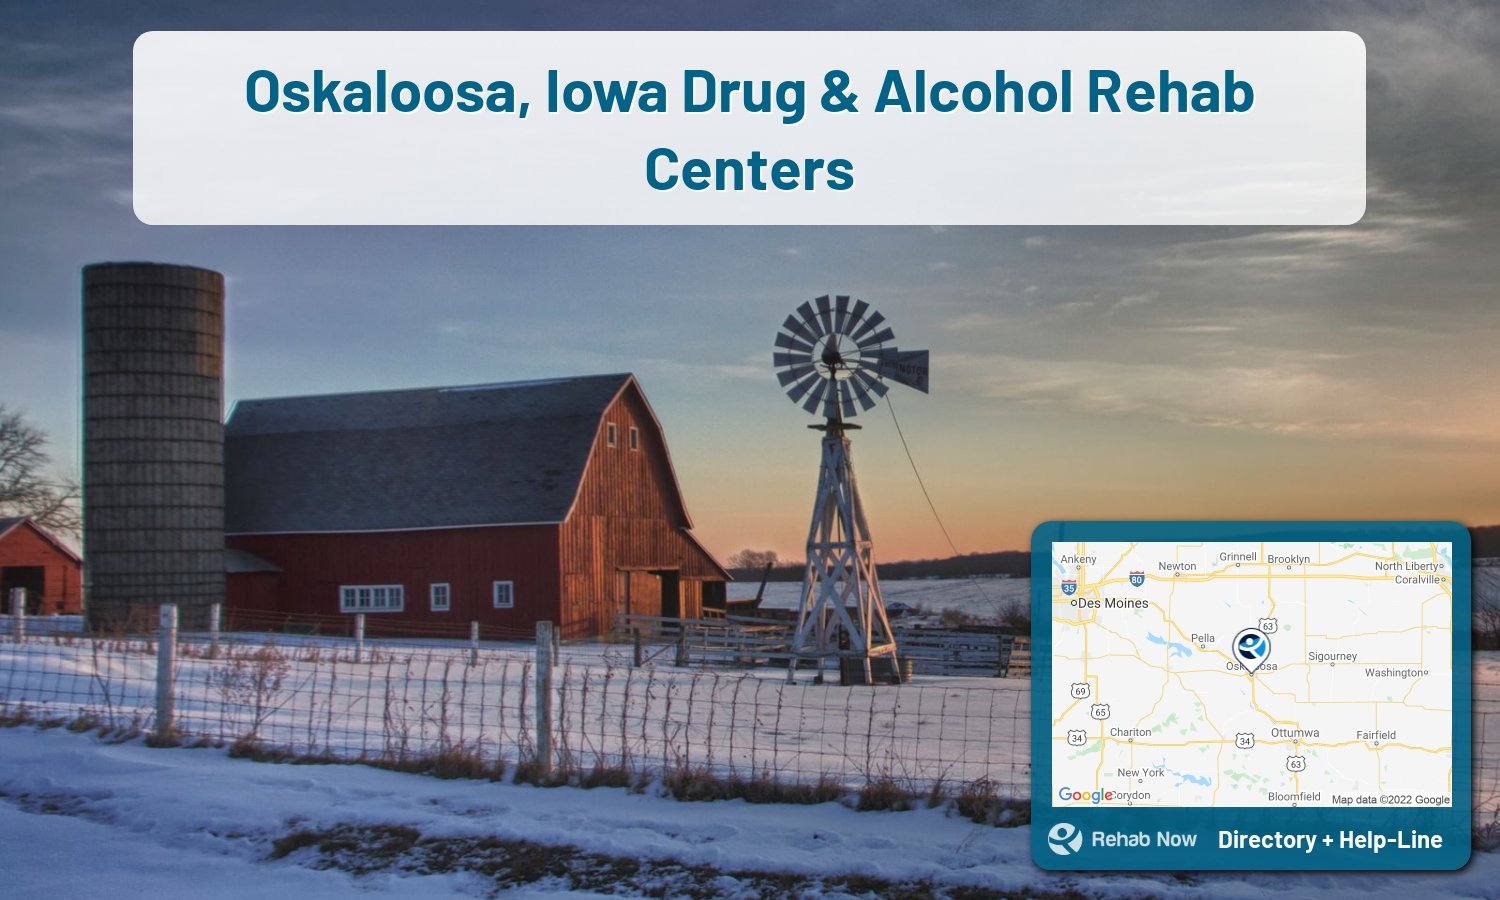 Oskaloosa, IA Treatment Centers. Find drug rehab in Oskaloosa, Iowa, or detox and treatment programs. Get the right help now!